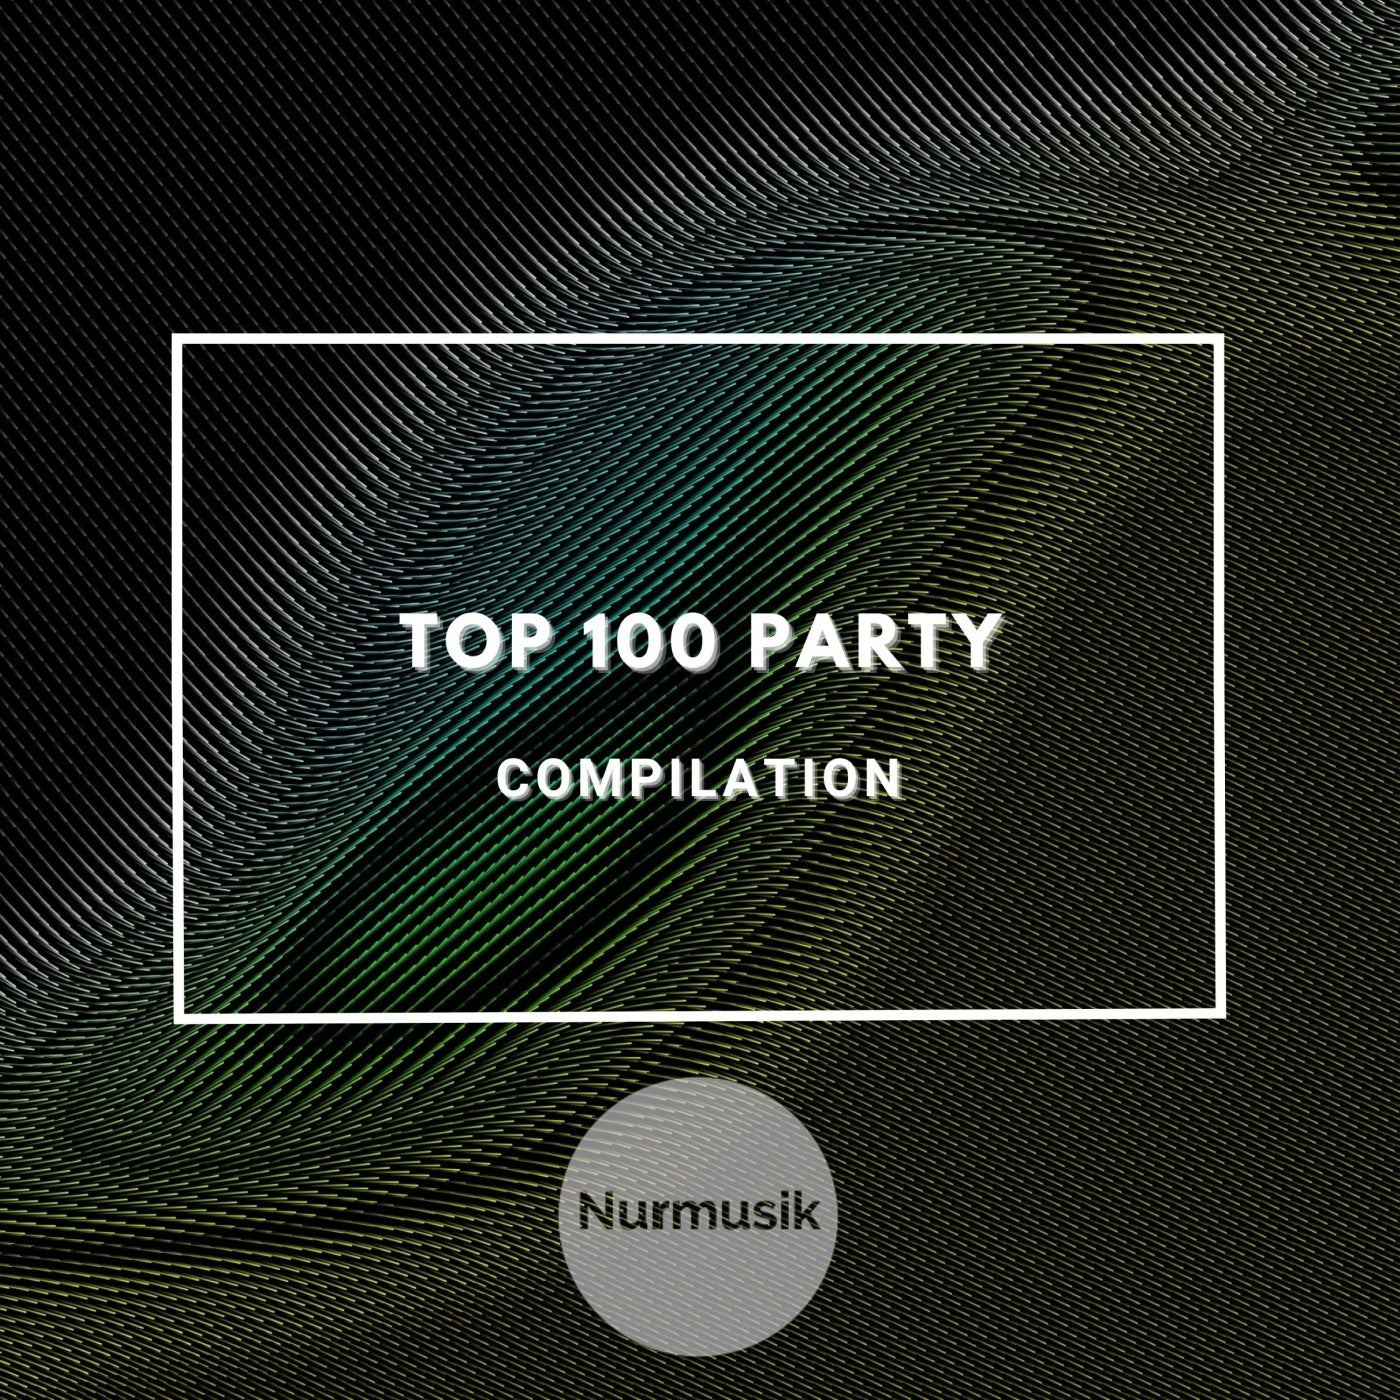 Top 100 Party